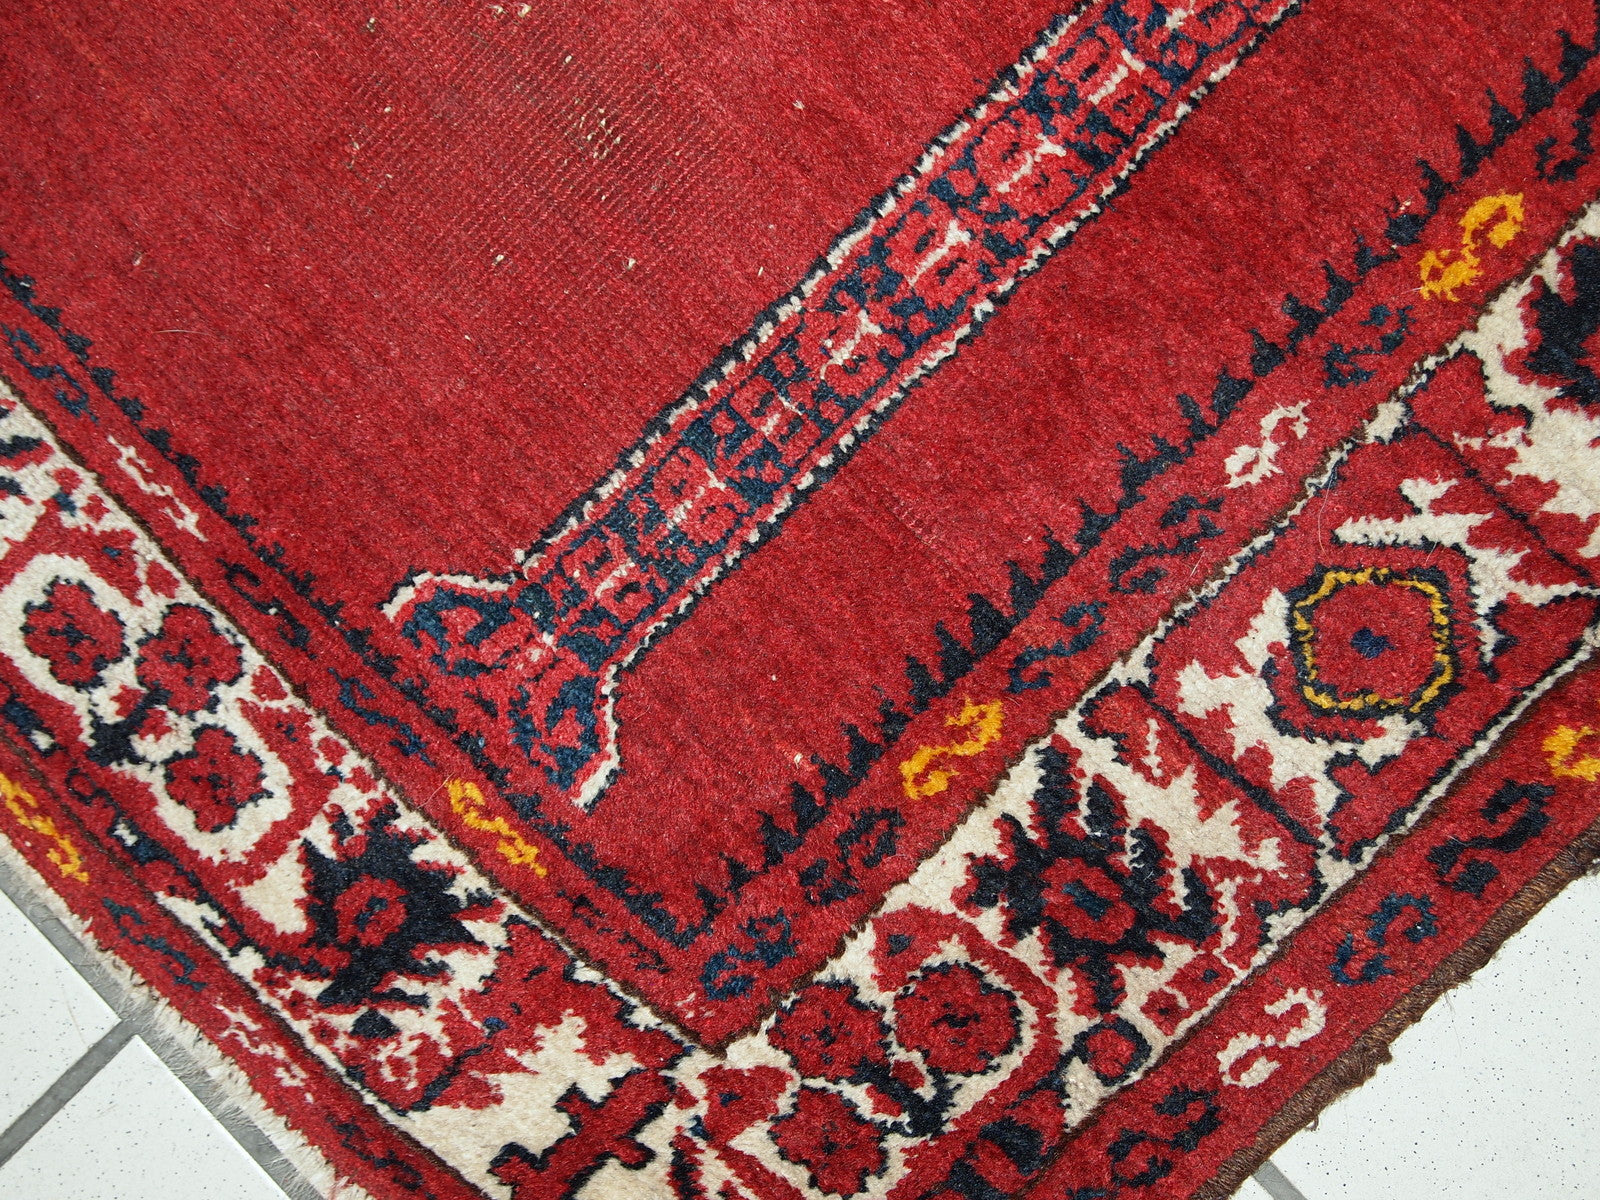 Vintage handmade Turkish prayer rug in bright red shade with yellow, white and navy blue details. The rug is in original condition, it has some low pile. Made out of soft wool. 